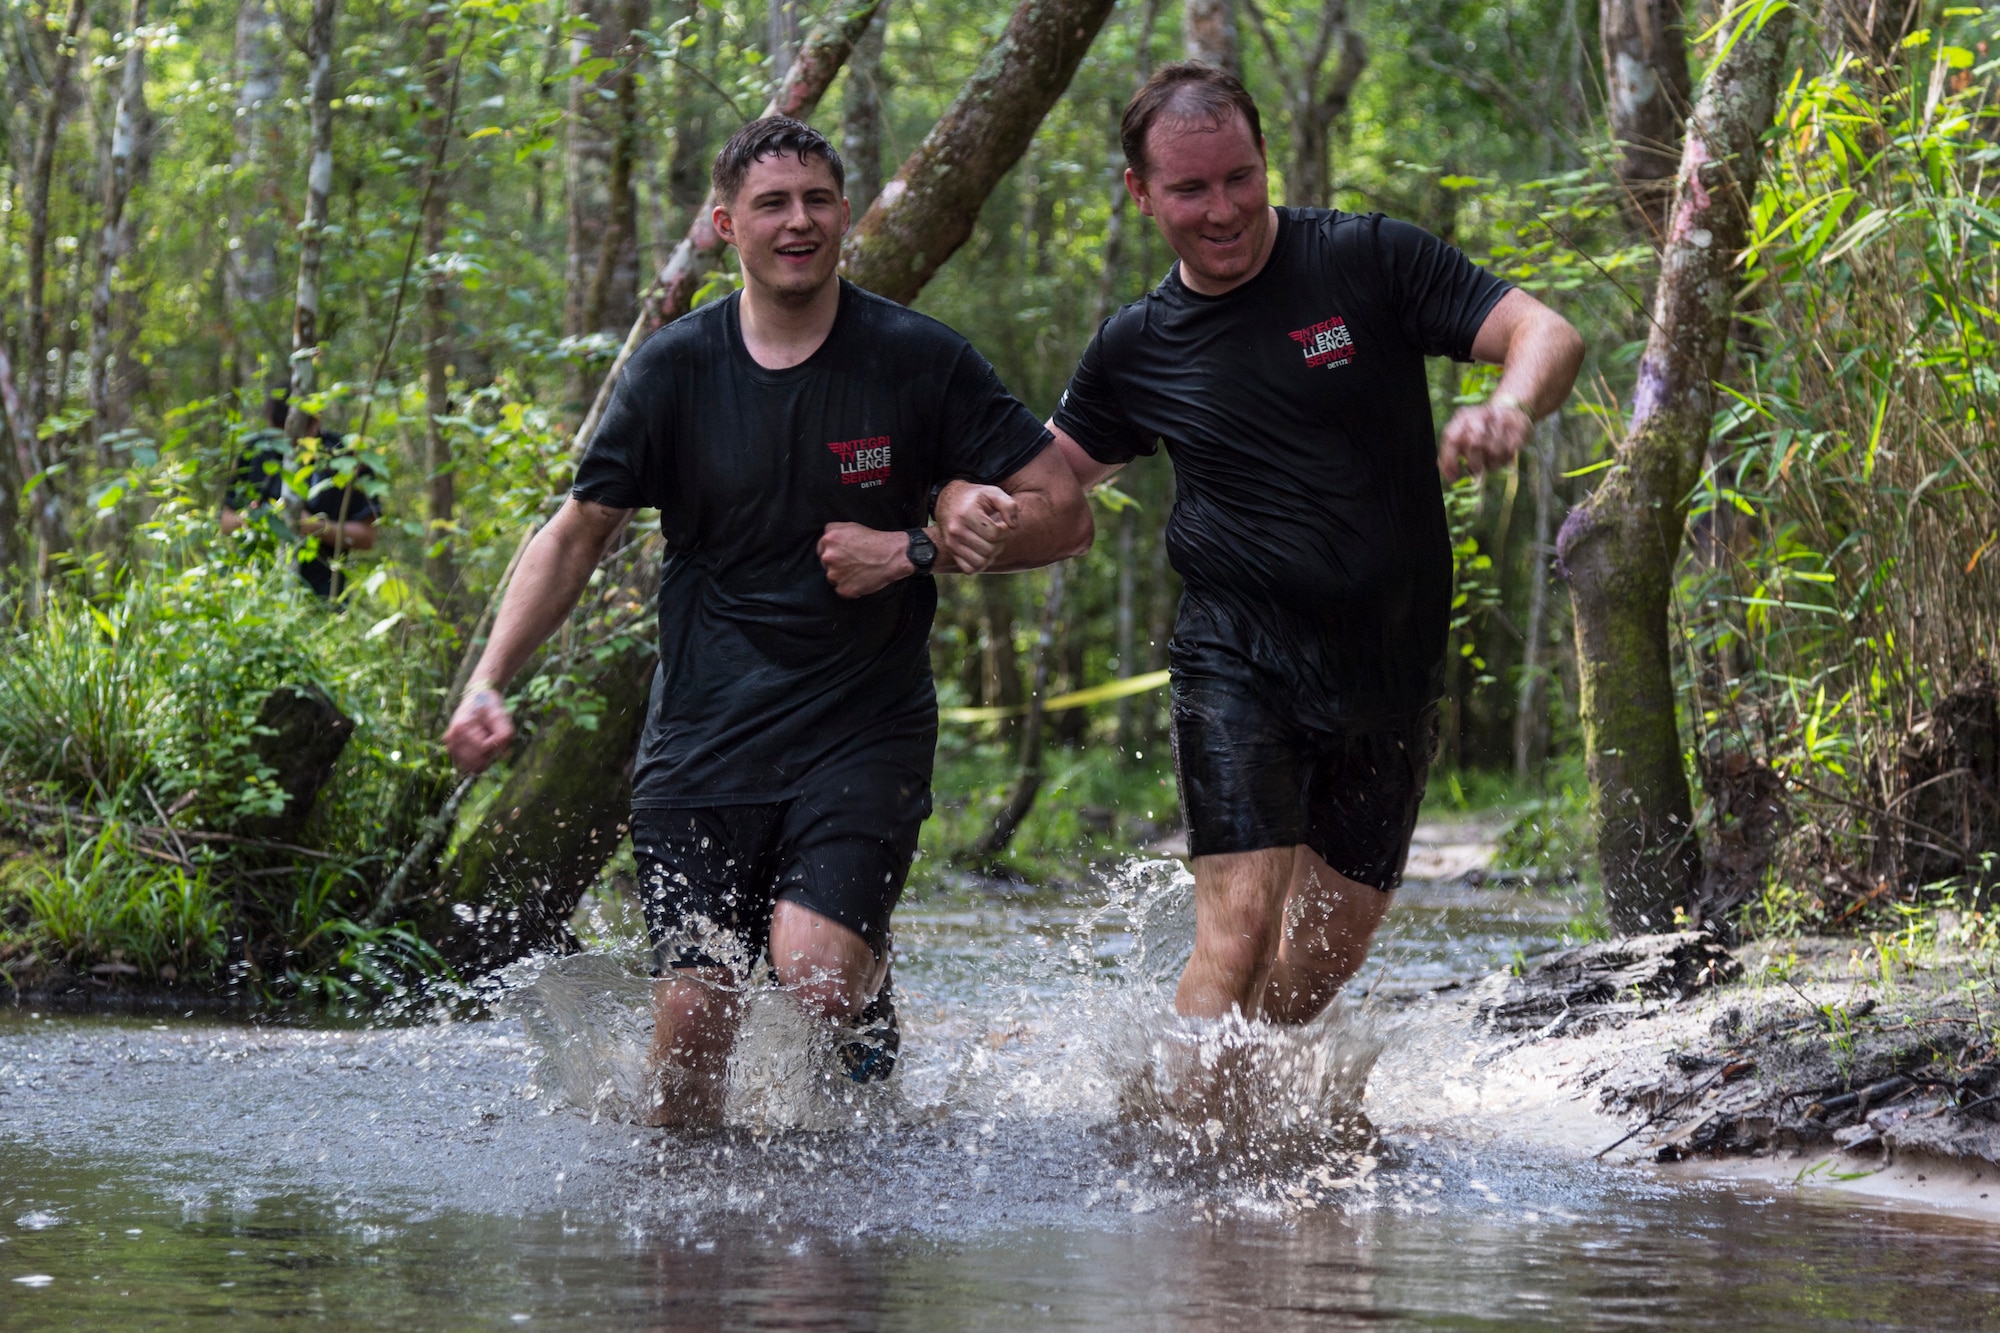 Participants run through a creek during the Moody Mud Run, May 4, 2019, at Possum Creek Off-Road Park in Ray City, Ga. The sixth annual Moody Mud Run had approximately 850 participants who had to overcome a series of obstacles on the 4 and 5-mile courses. The 32-obstacle course gave Airmen, families and the local community an opportunity to build camaraderie and teamwork skills. (U.S. Air Force Photo by Airman 1st Class Taryn Butler)